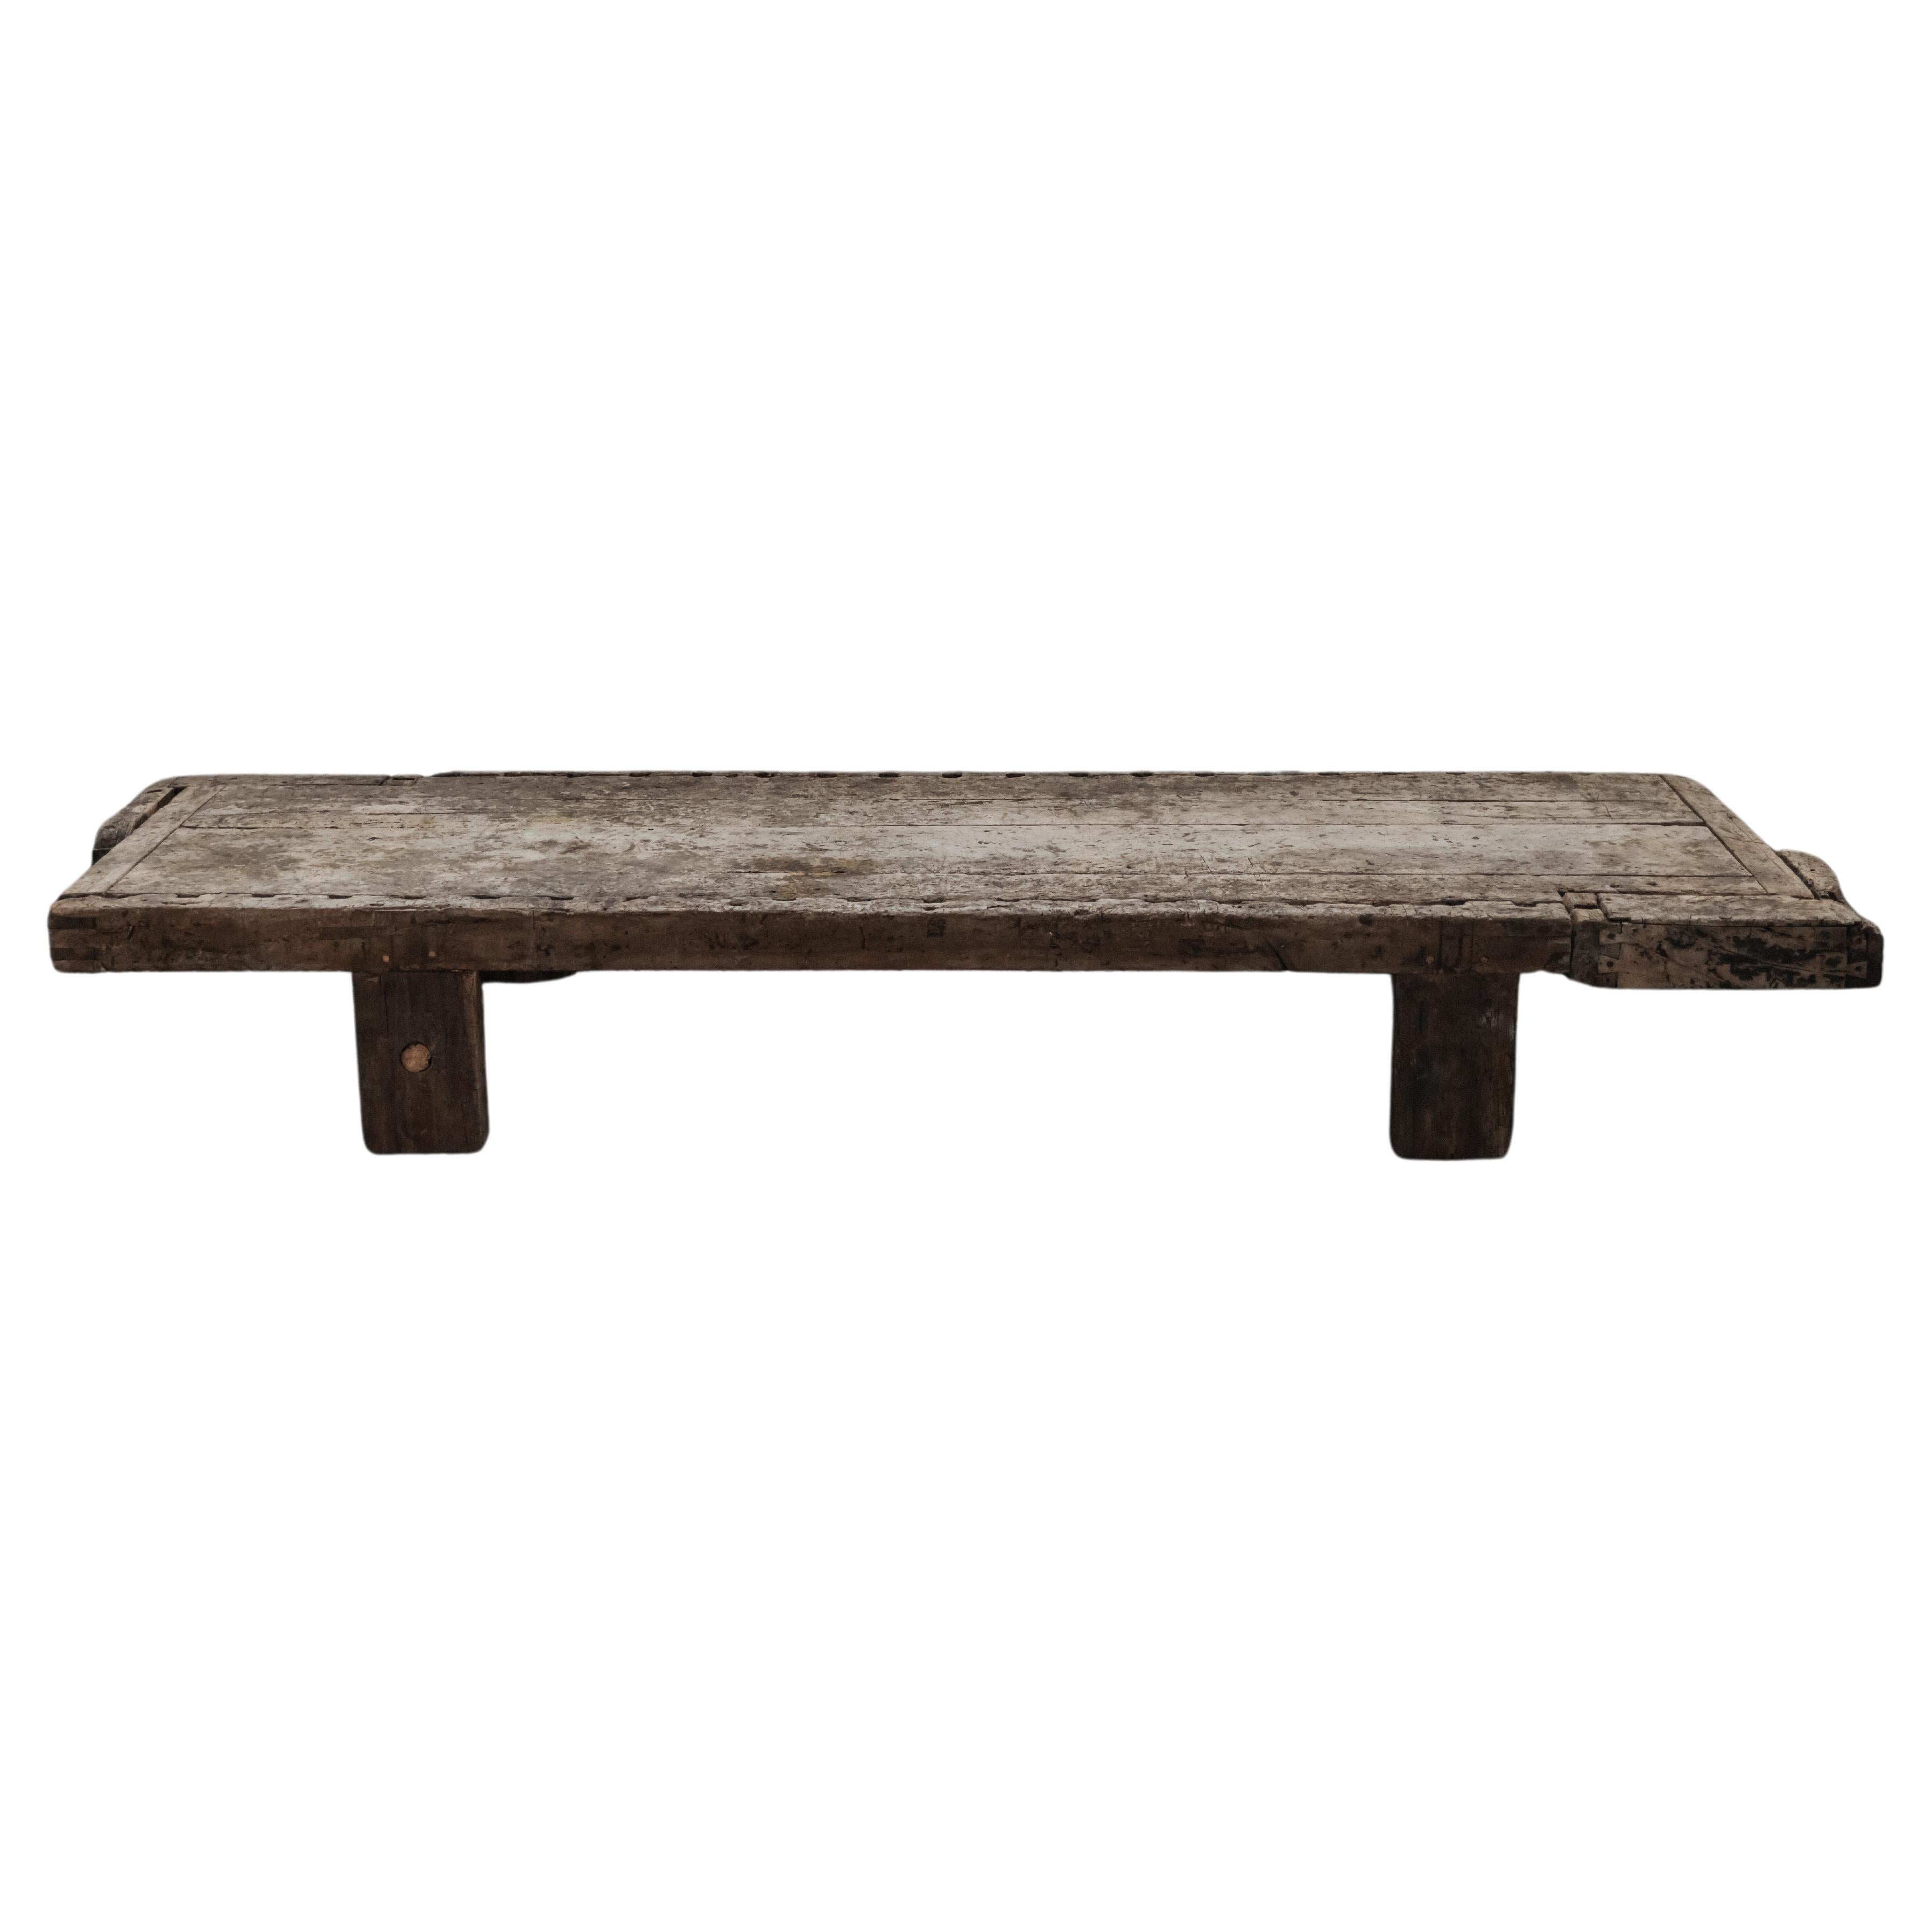 XL Primitive Coffee Table From France, Circa 1900 For Sale